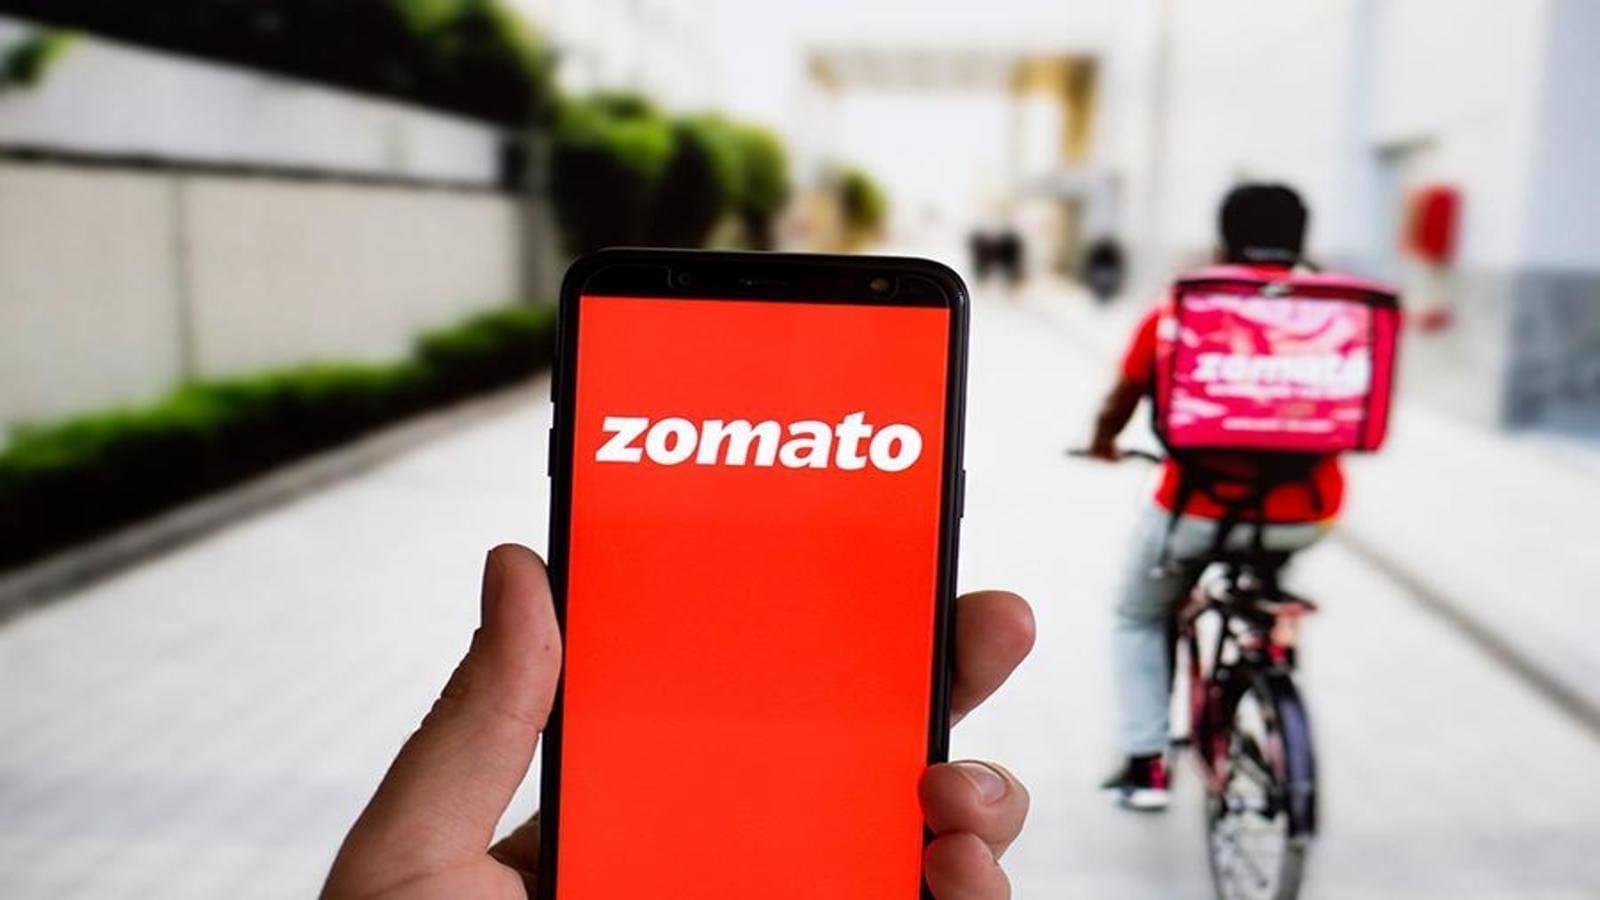 Zomato raises US$250 million in new funding round even as it re-evelutes its office catering business